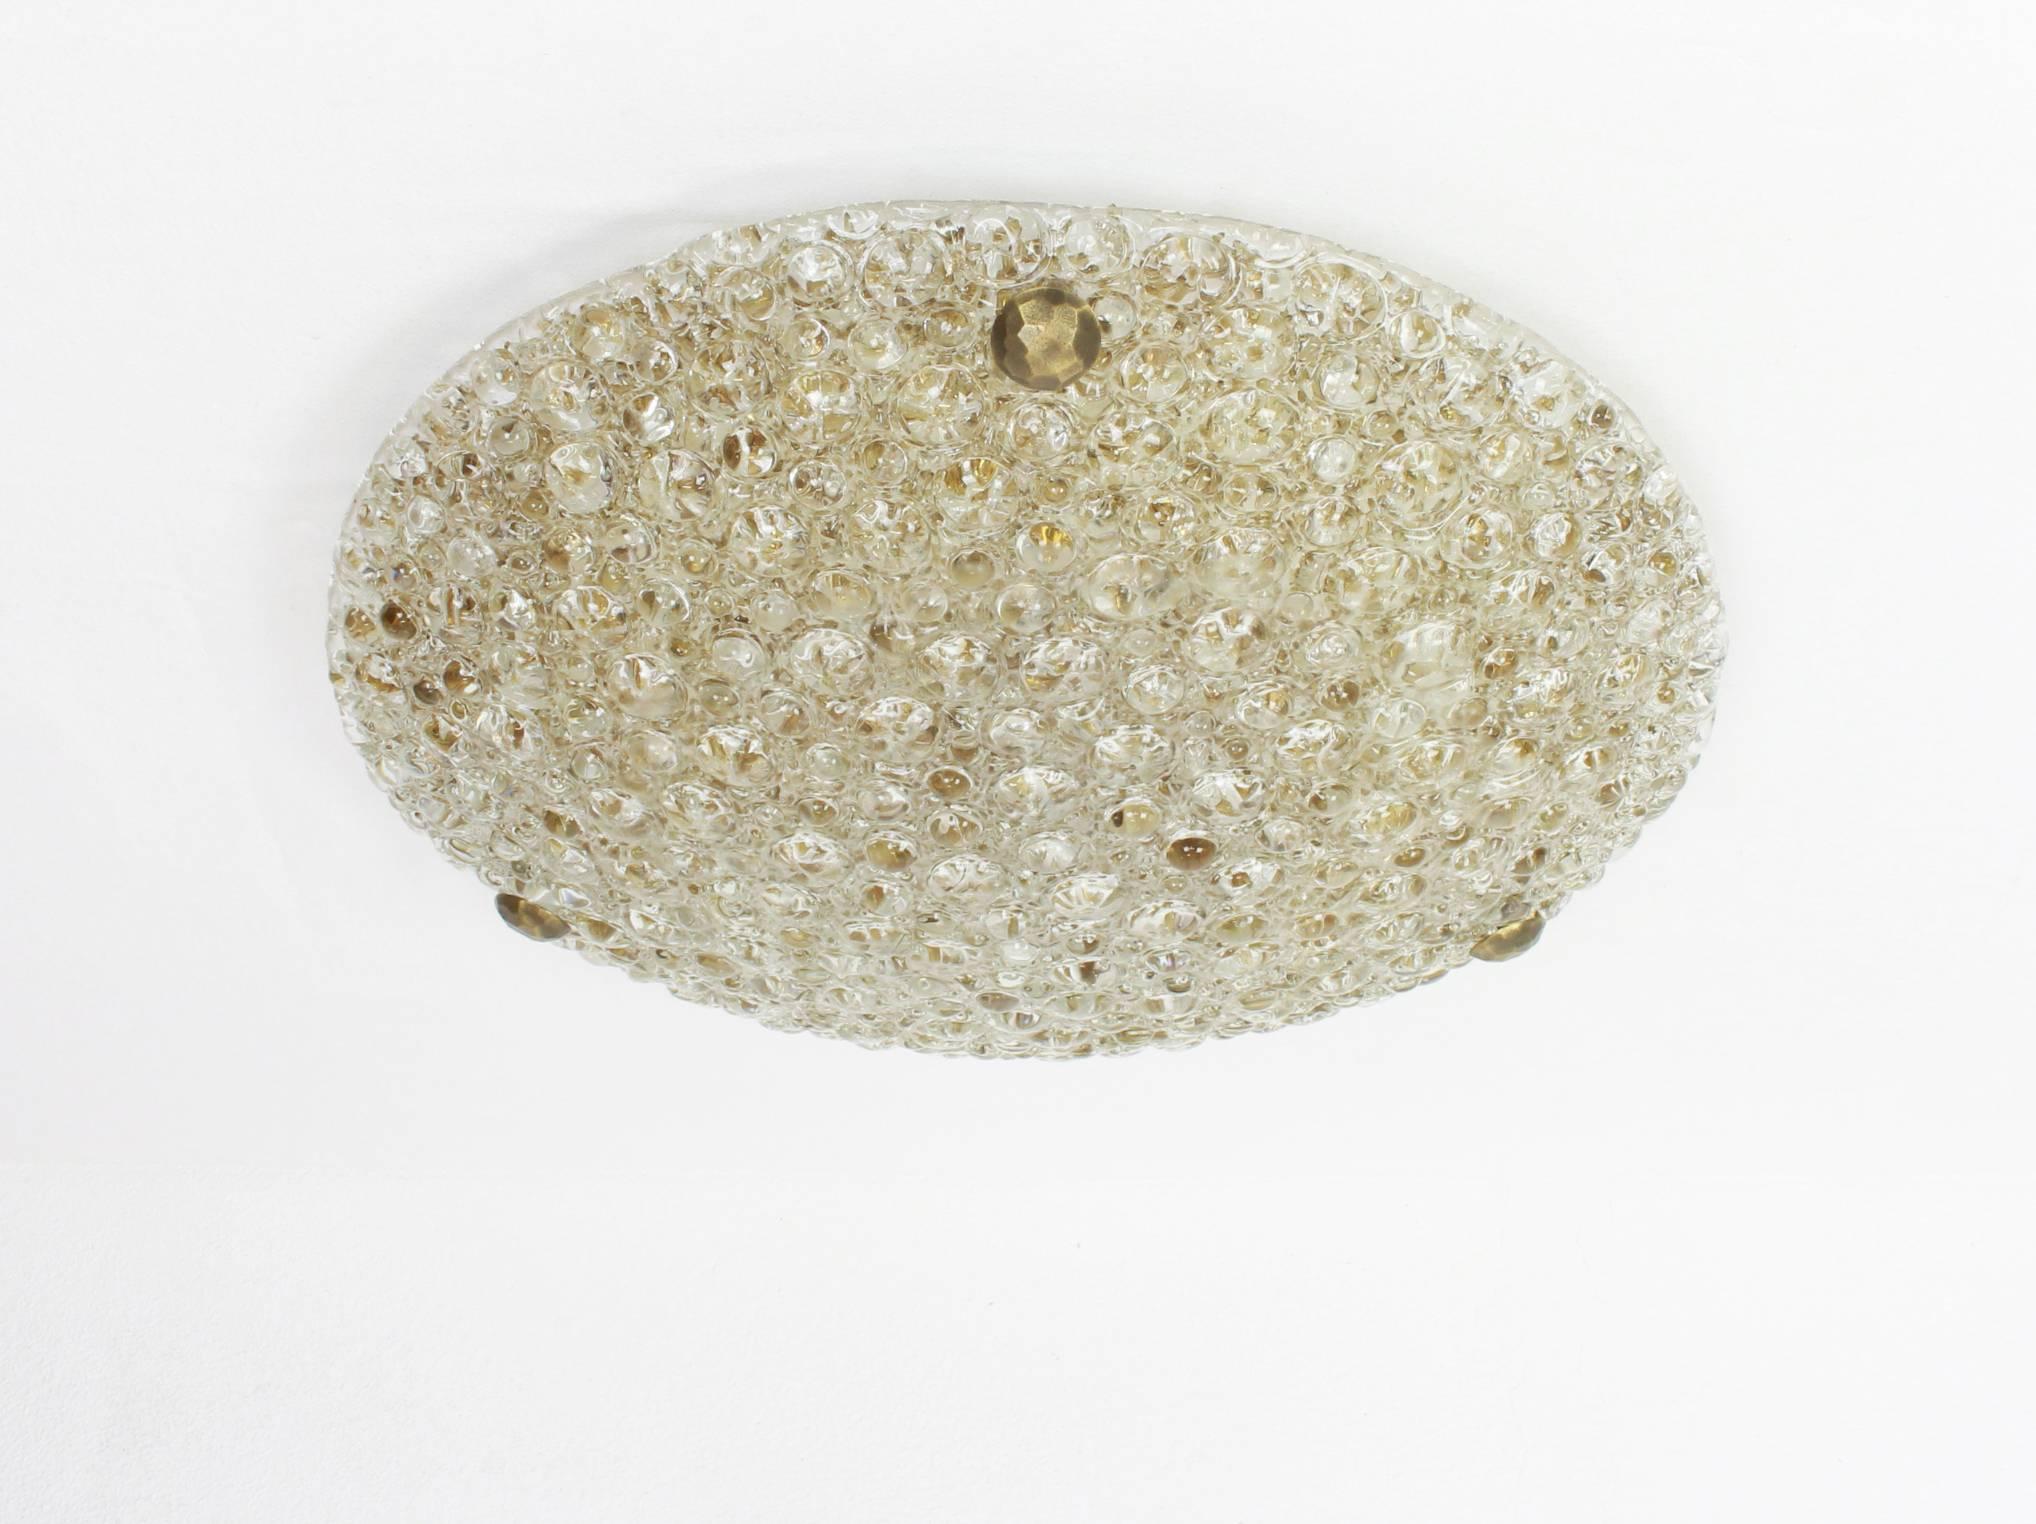 A wonderful round Murano glass flush mount by Hillebrand Leuchten, Germany, 1970s.
 Thick smoke toned textured ice glass fixtured on a brass metal base with three brass screws.

High quality and in perfect condition. Cleaned, well-wired and ready to